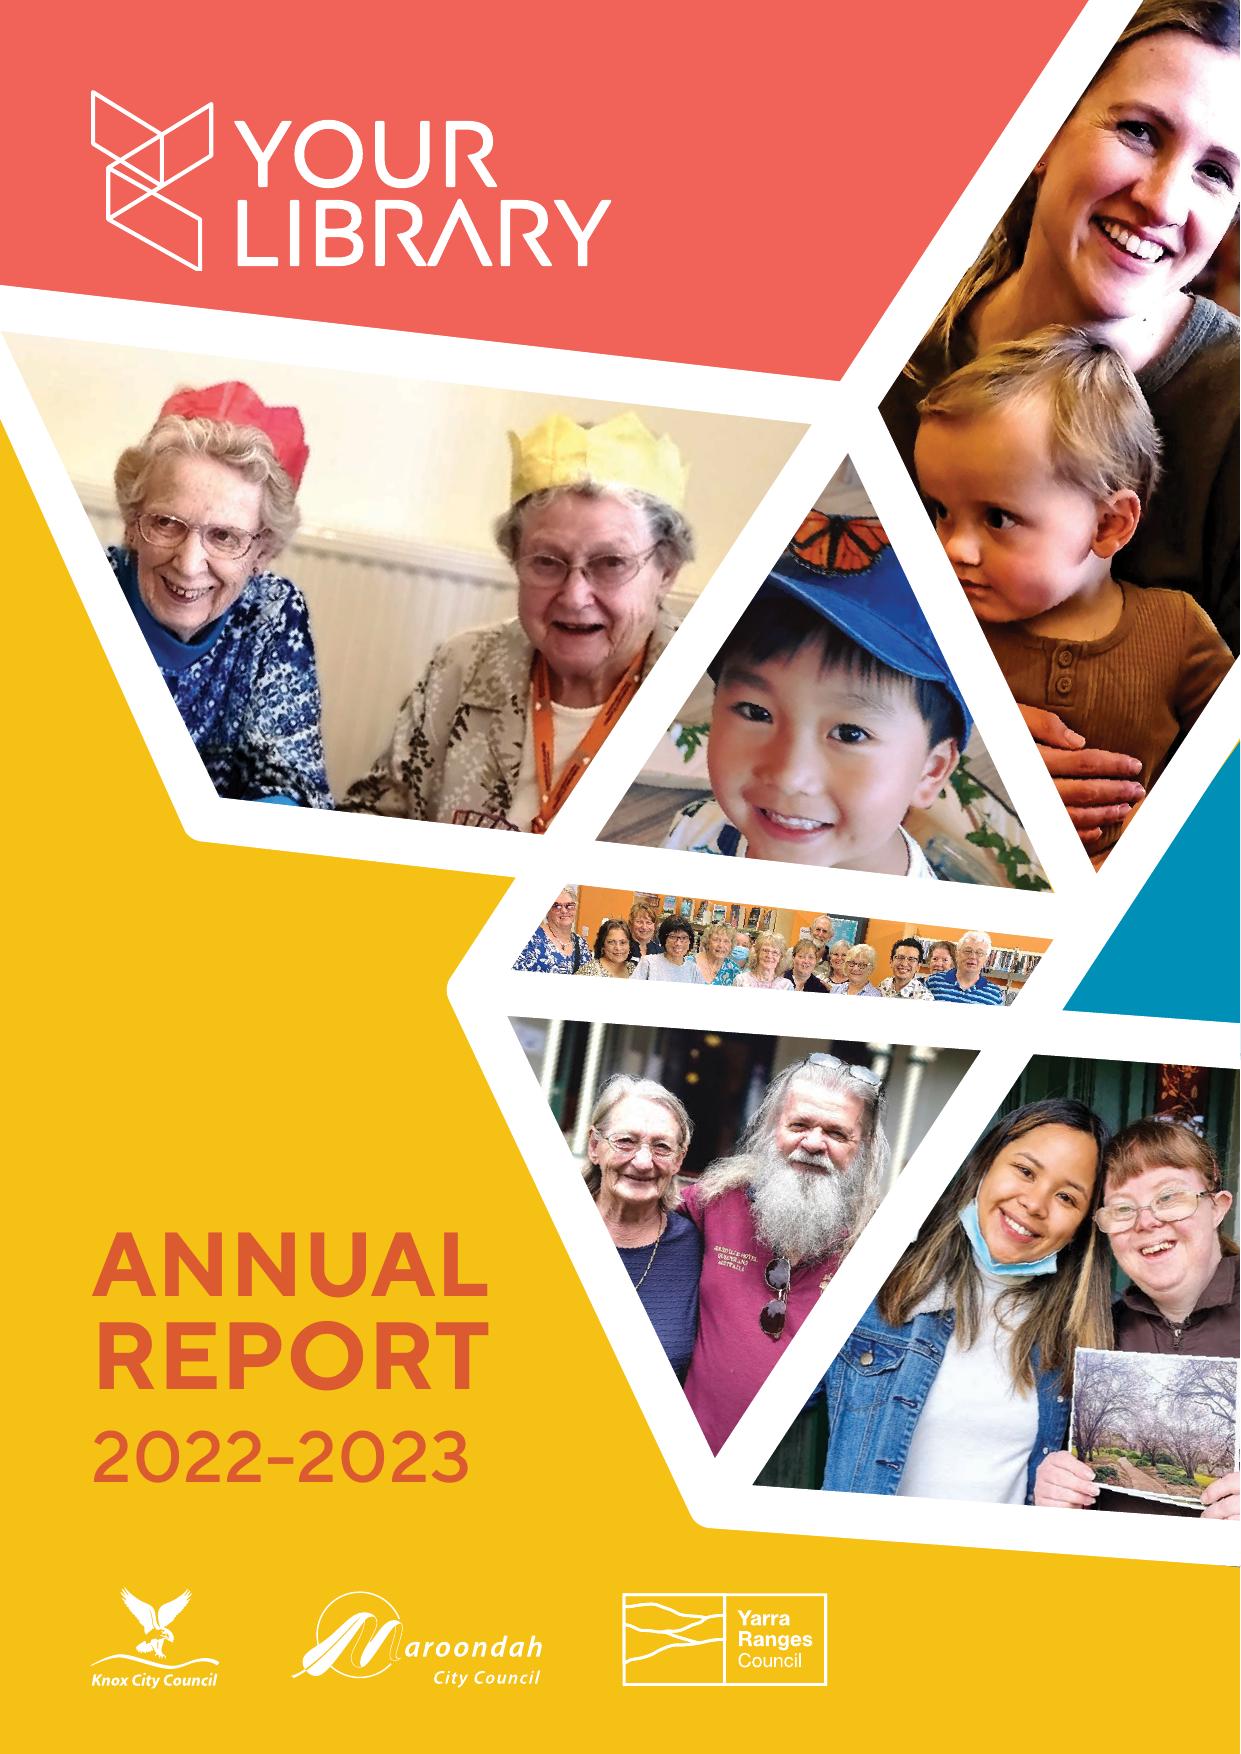 YOURLIBRARY 2023 Annual Report